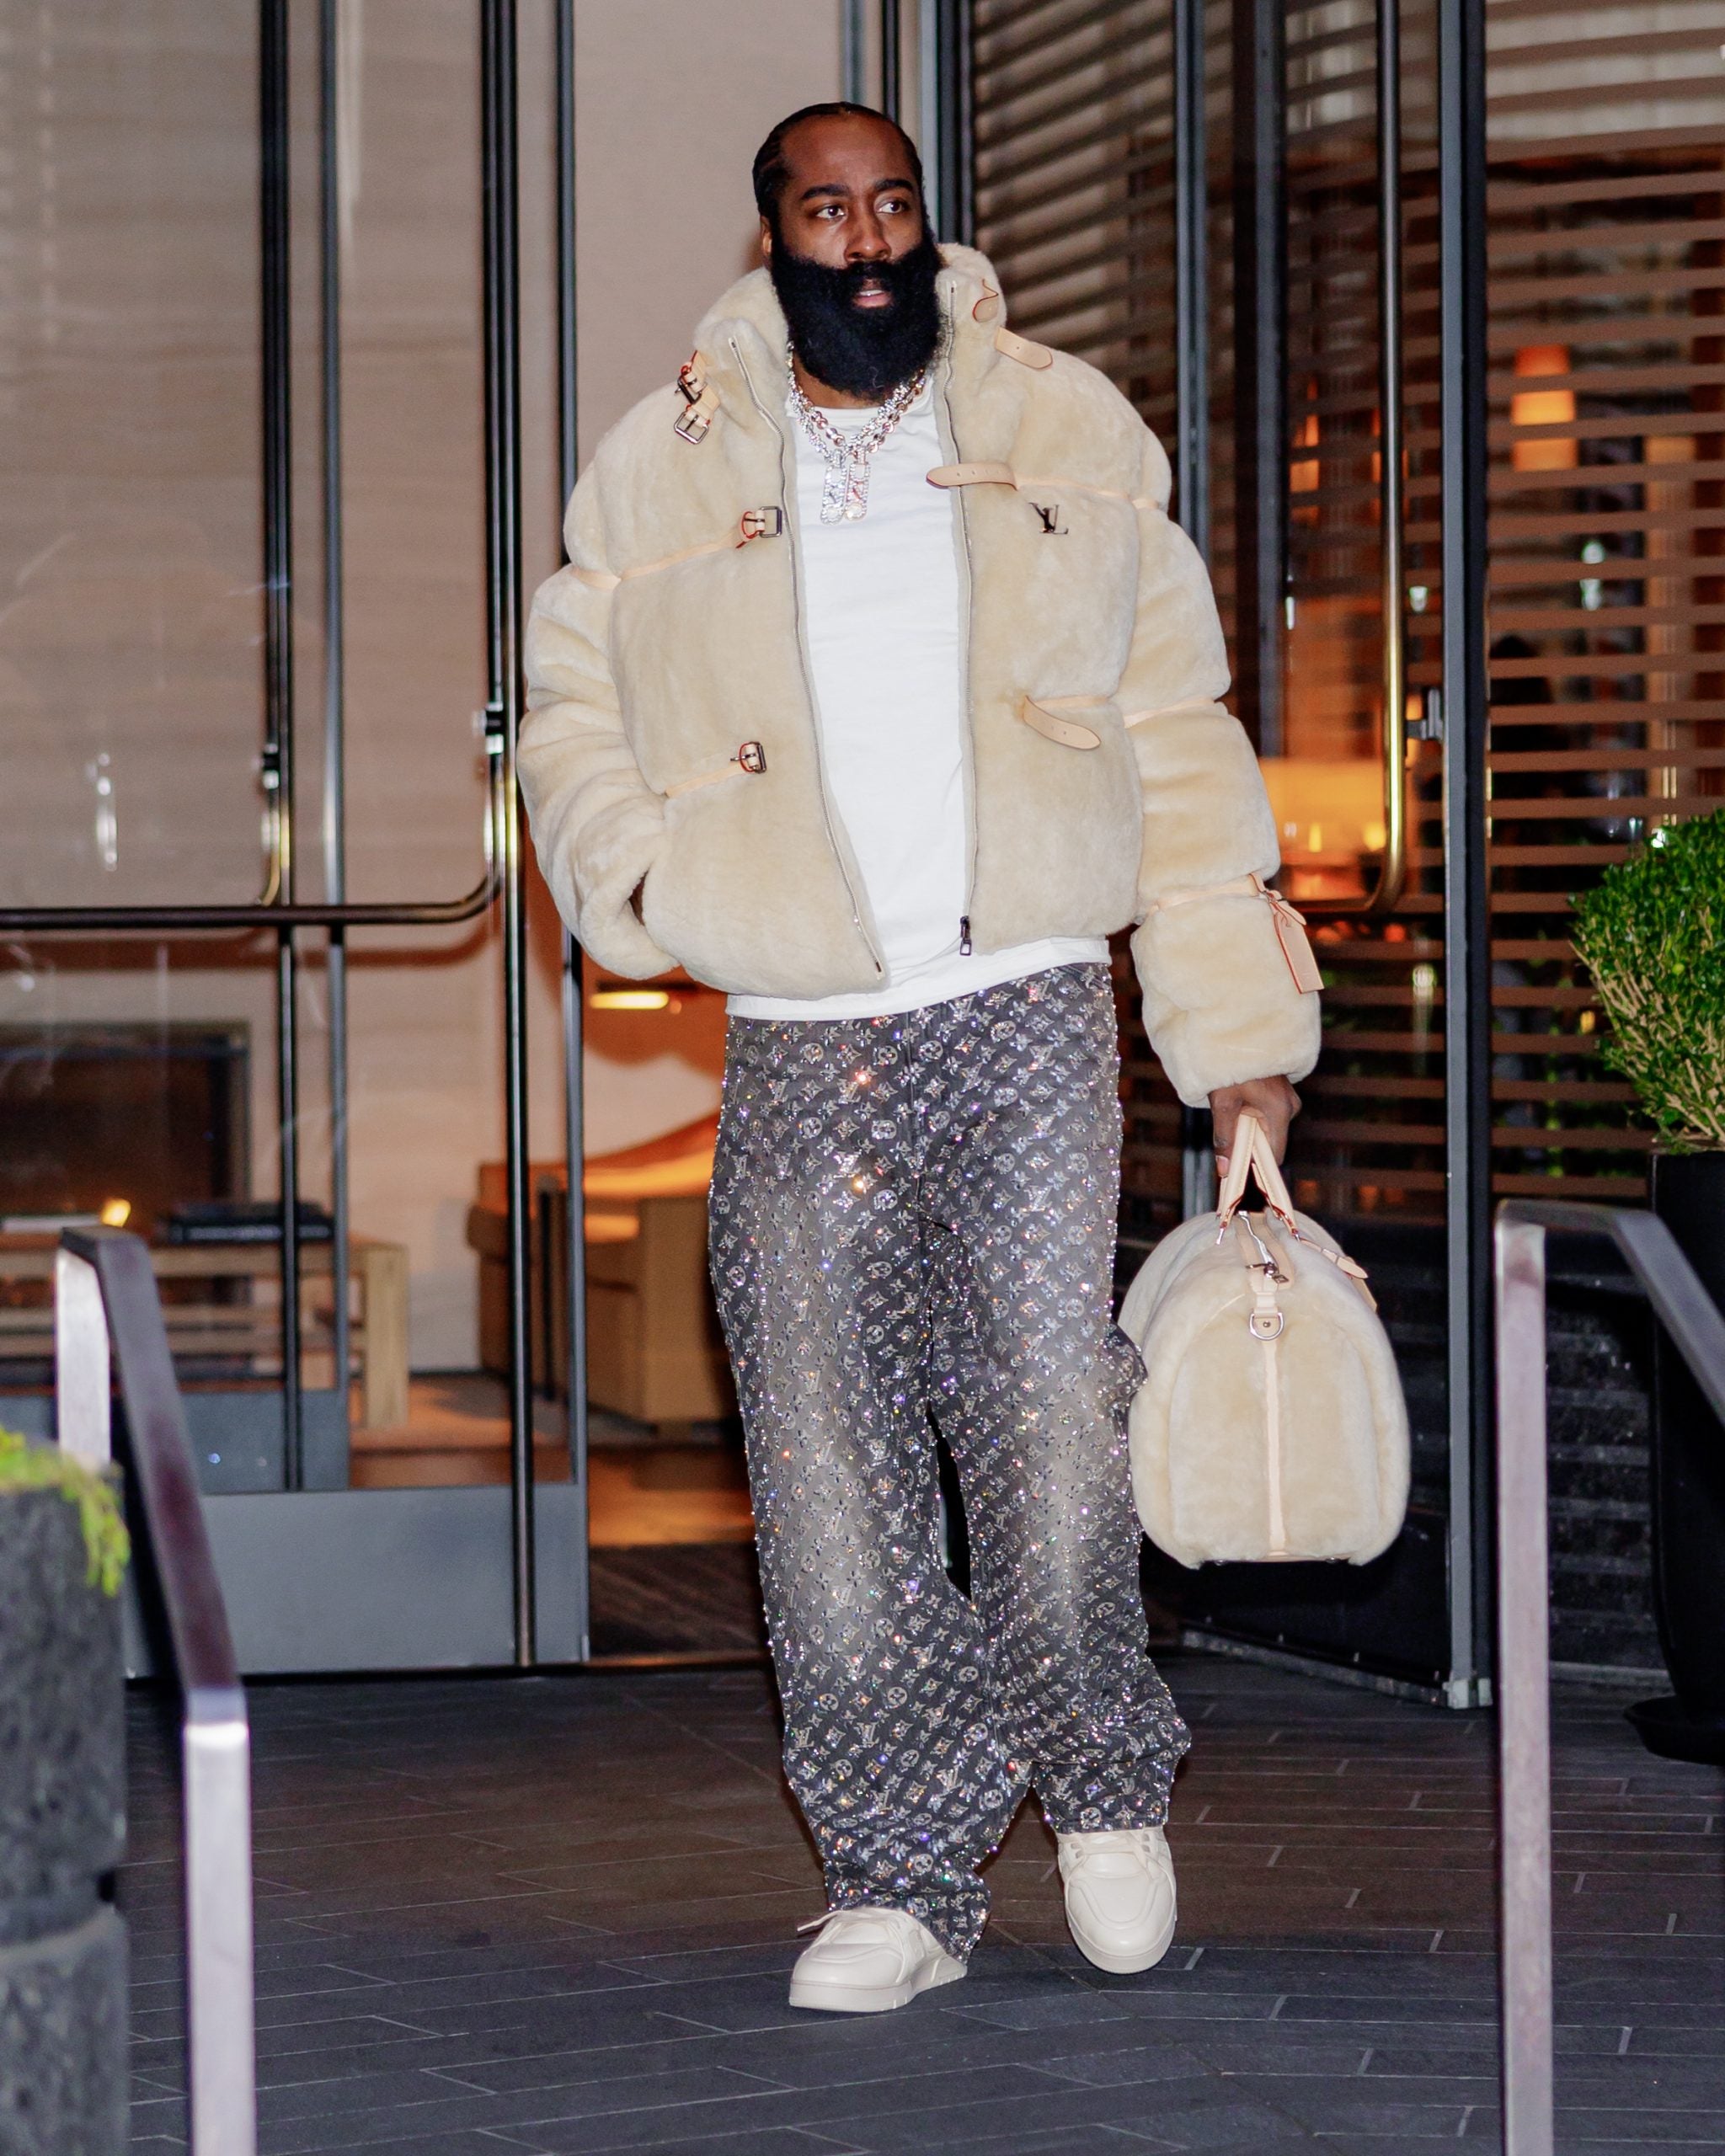 In Case You Missed It: James Harden Makes A Statement In Louis Vuitton, Rihanna Debuts Blonde Hair, And More